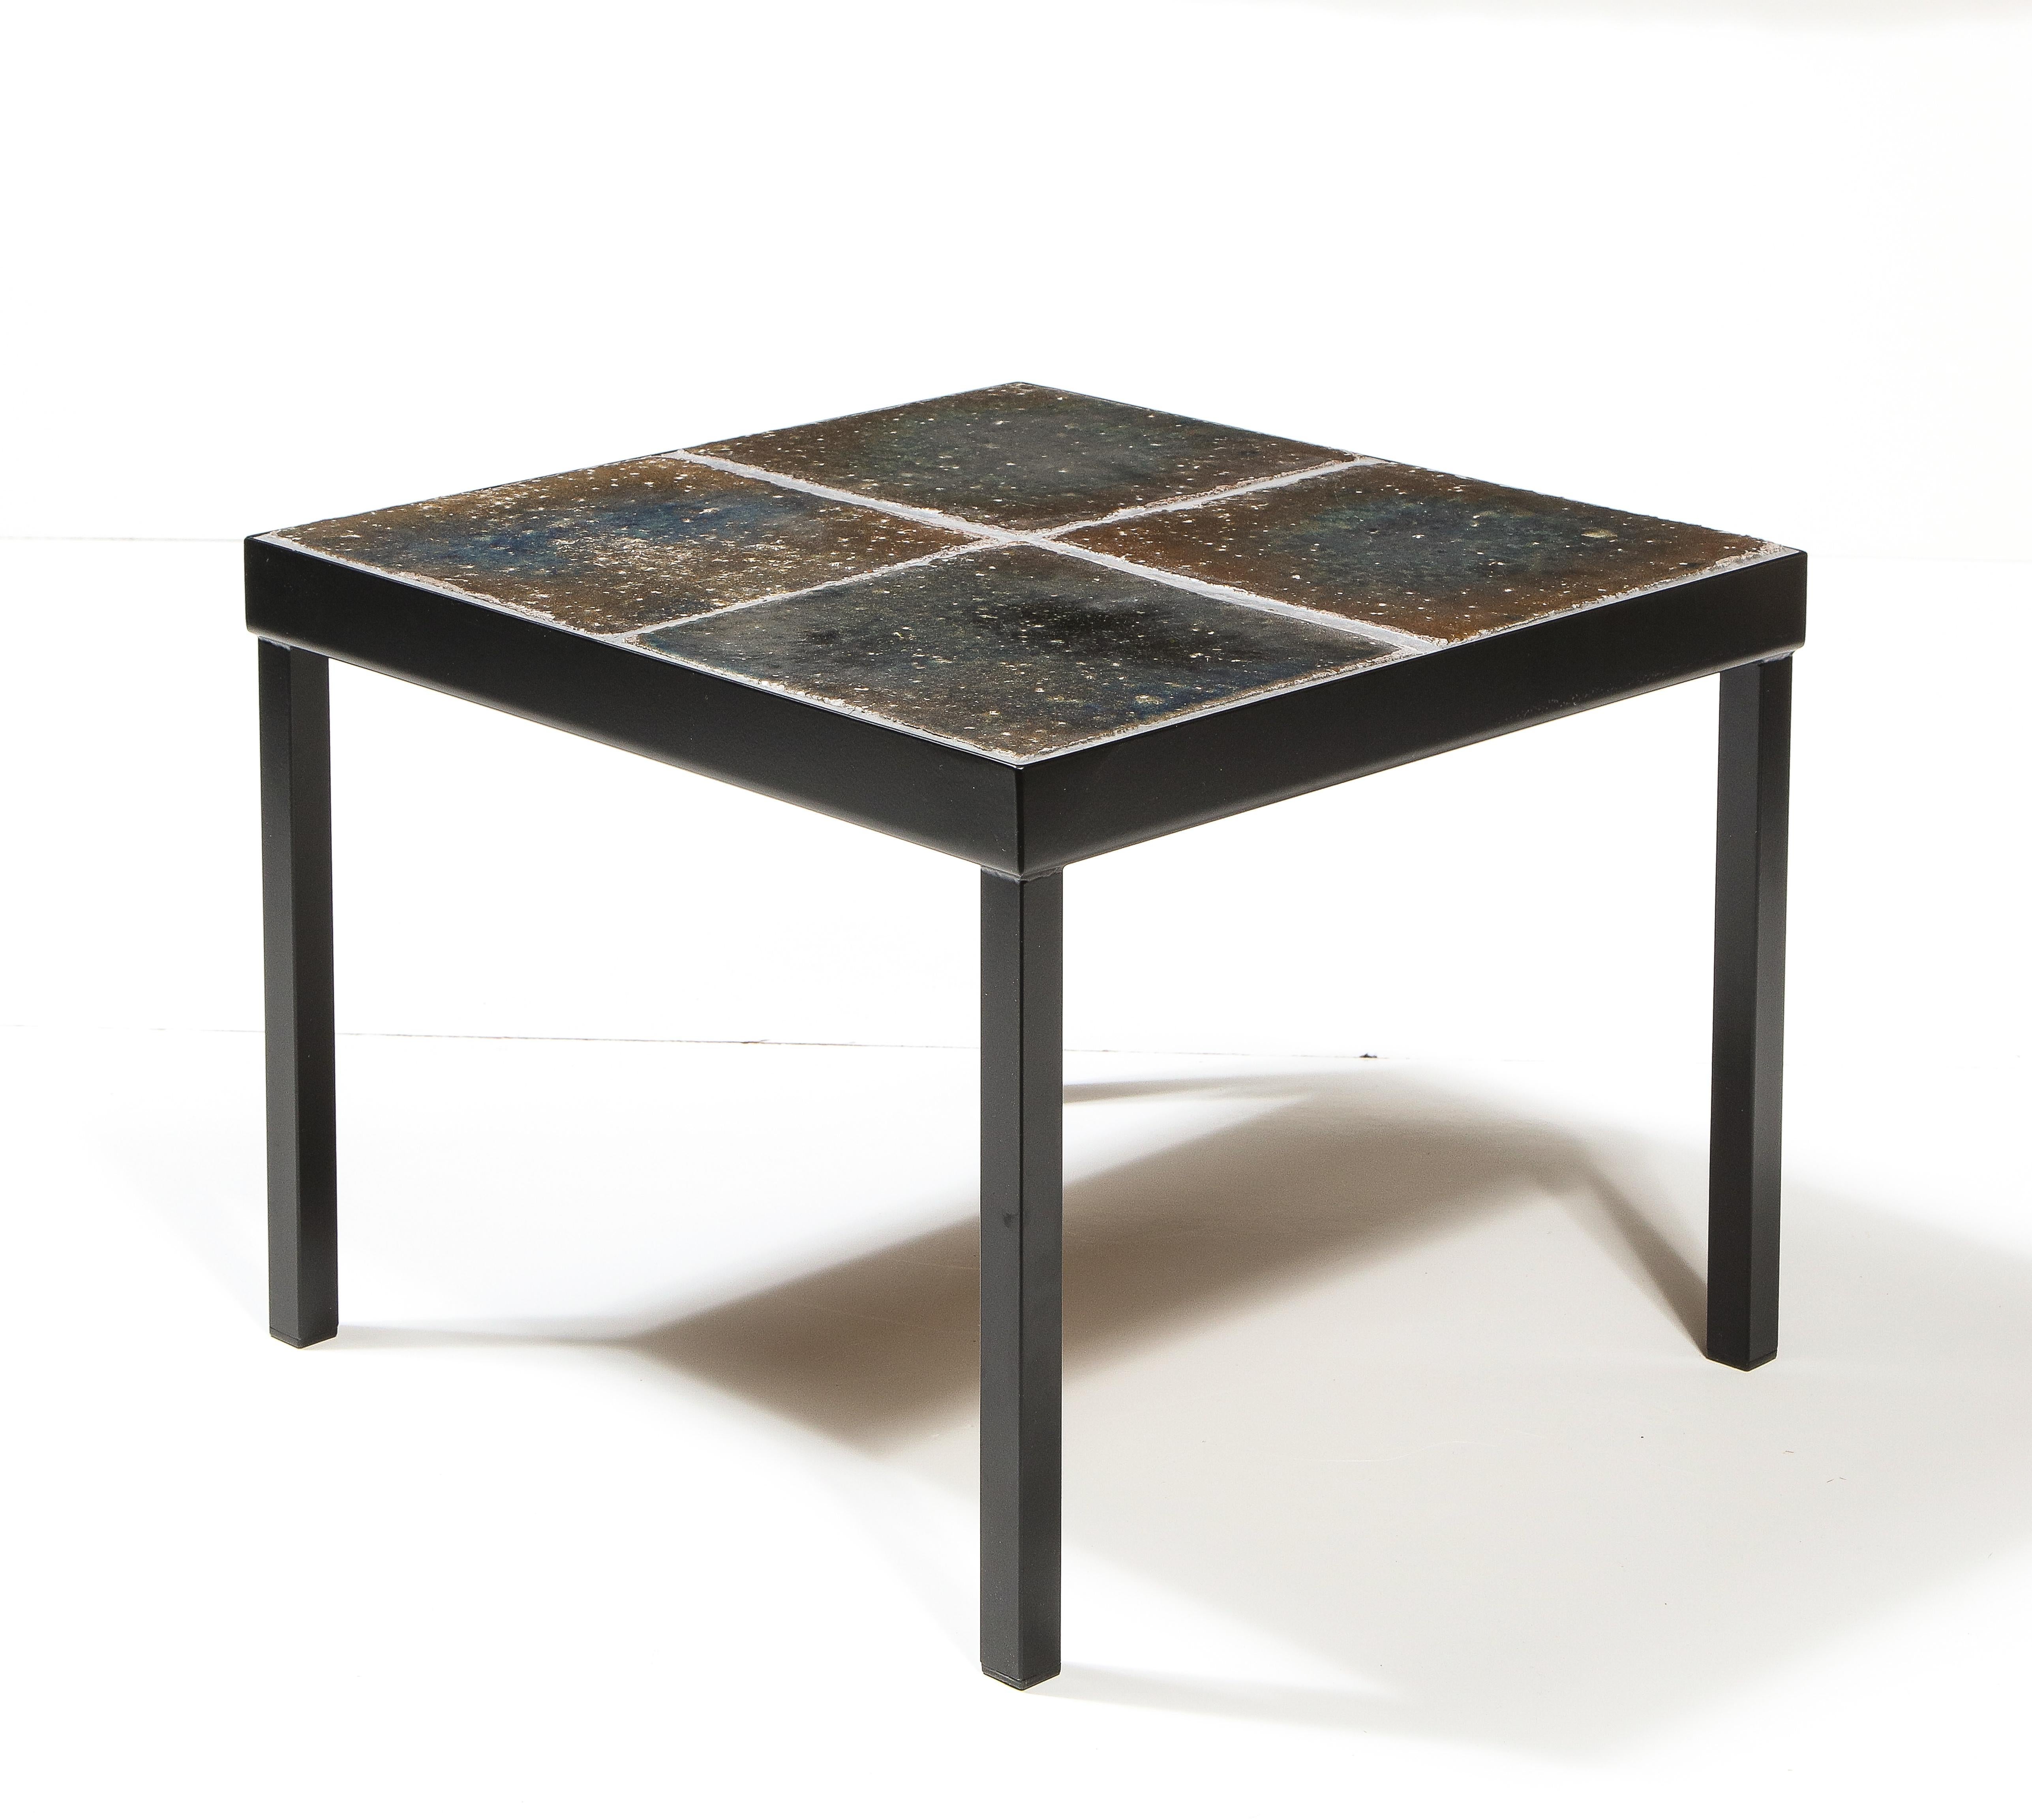 Italian Lava Enameled Side Table, Italy, c. 1960s For Sale